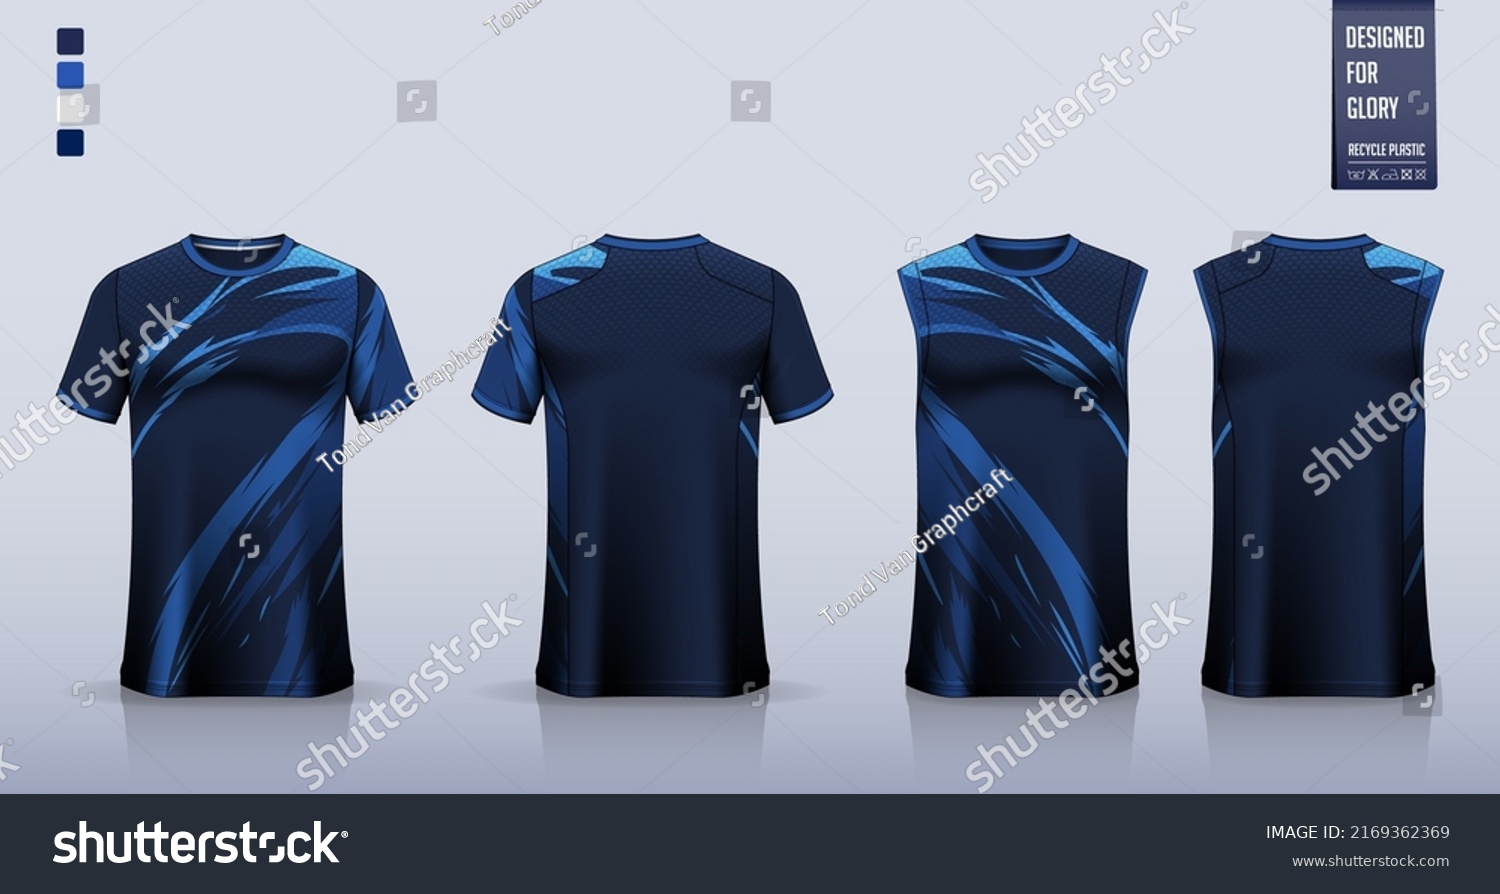 T-shirt mockup, sport shirt template design for soccer jersey, football kit. Tank top for basketball jersey, running singlet. Fabric pattern for sport uniform in front and back view. Vector. #2169362369